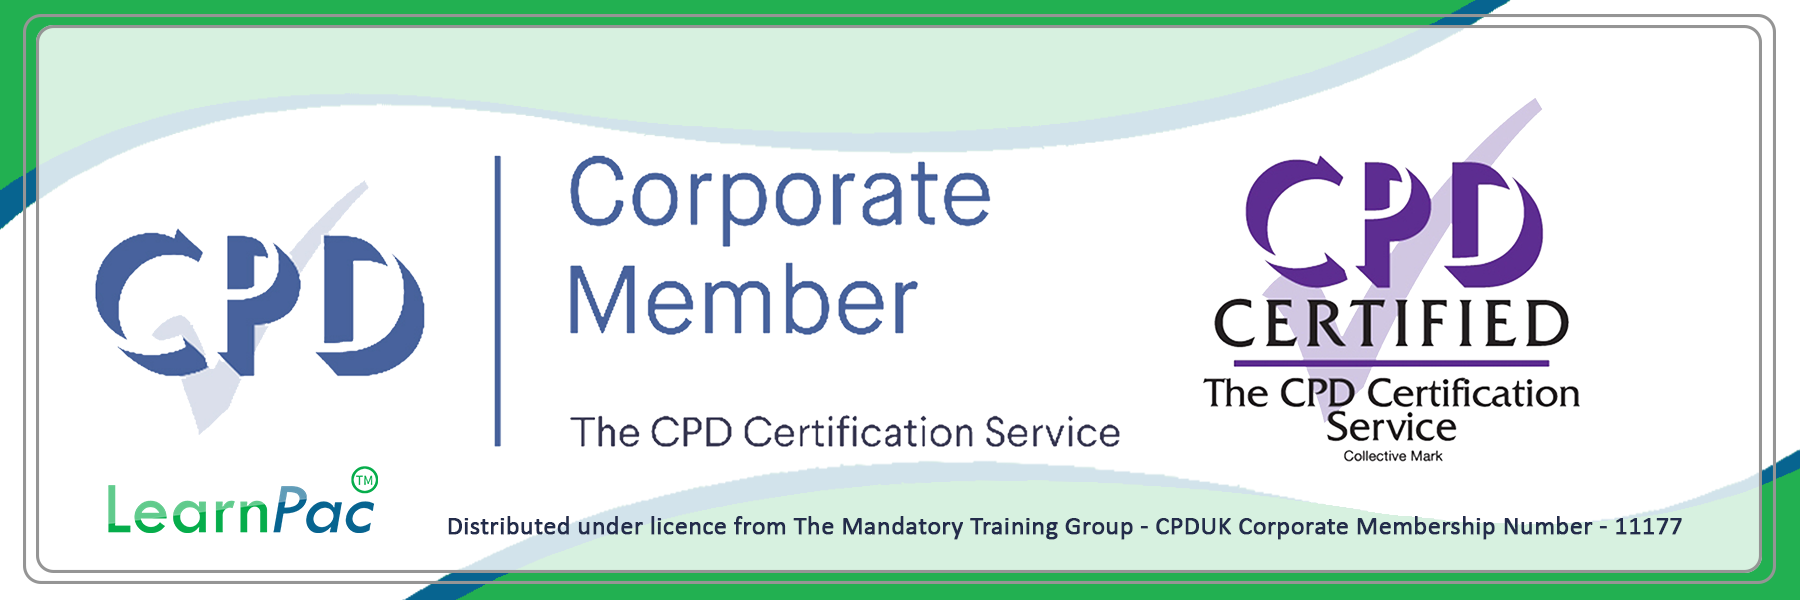 GDPR Training - E-Learning Courses with Certificates - CPD Certified - LearnPac Systems UK -